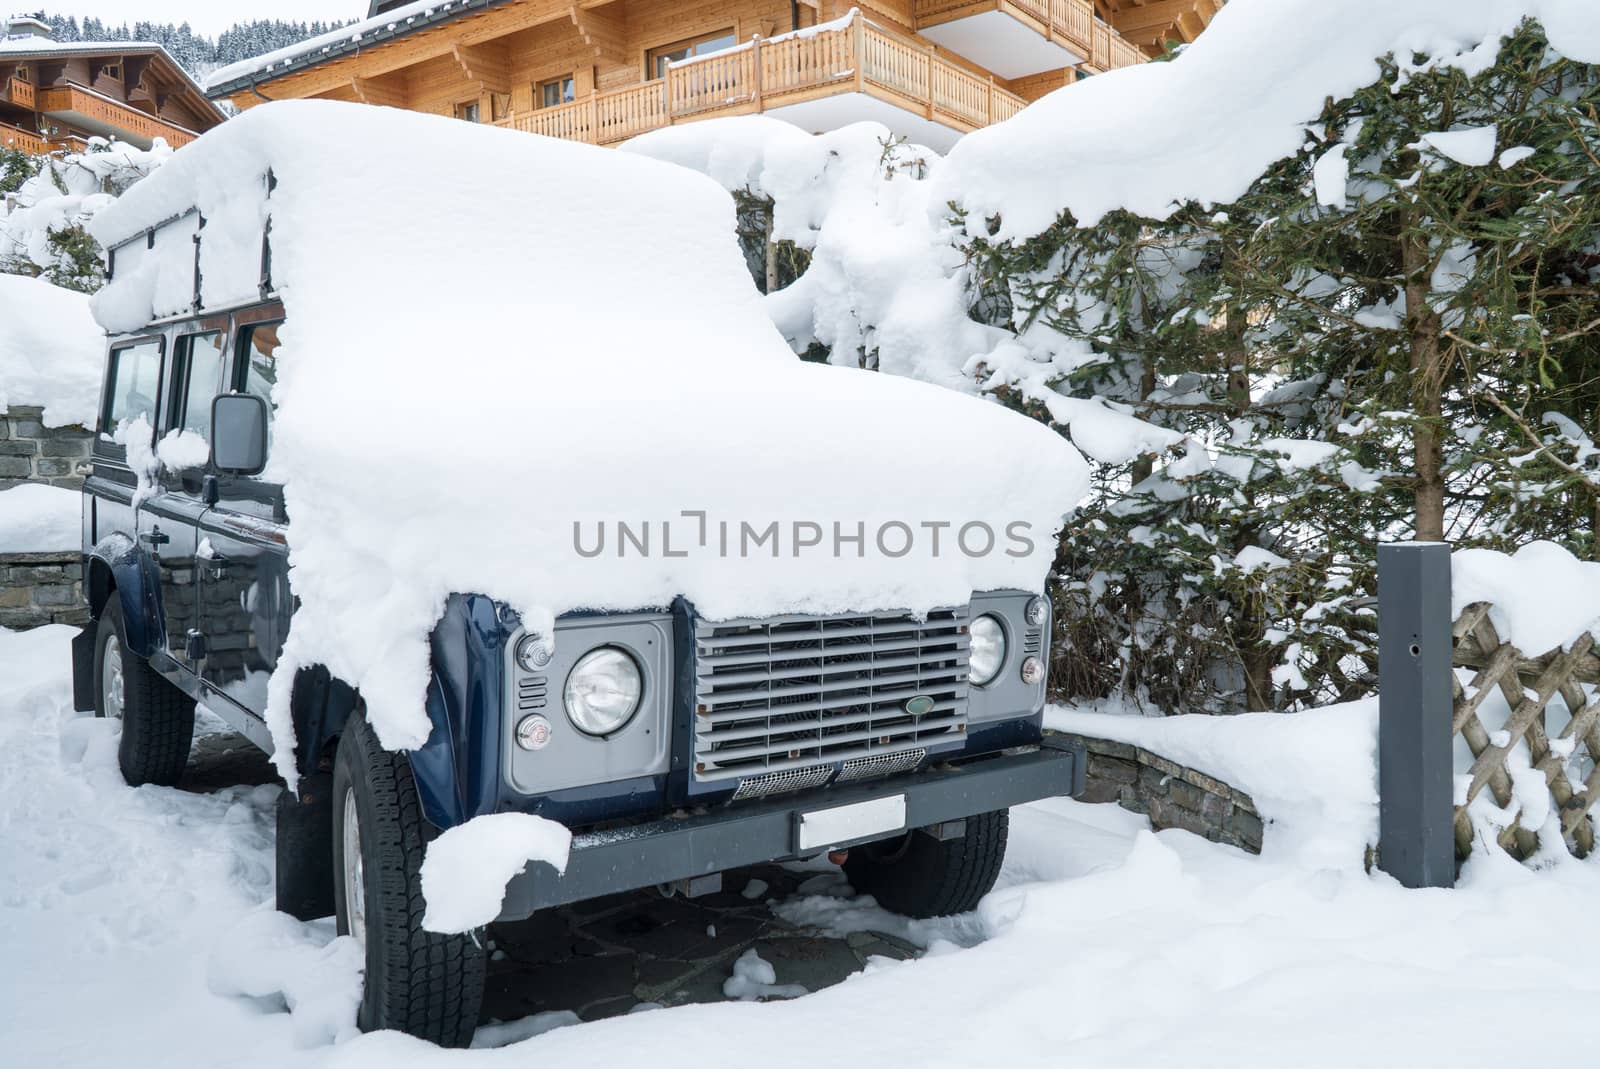 Four-wheel drive like a Jeep covered with snow